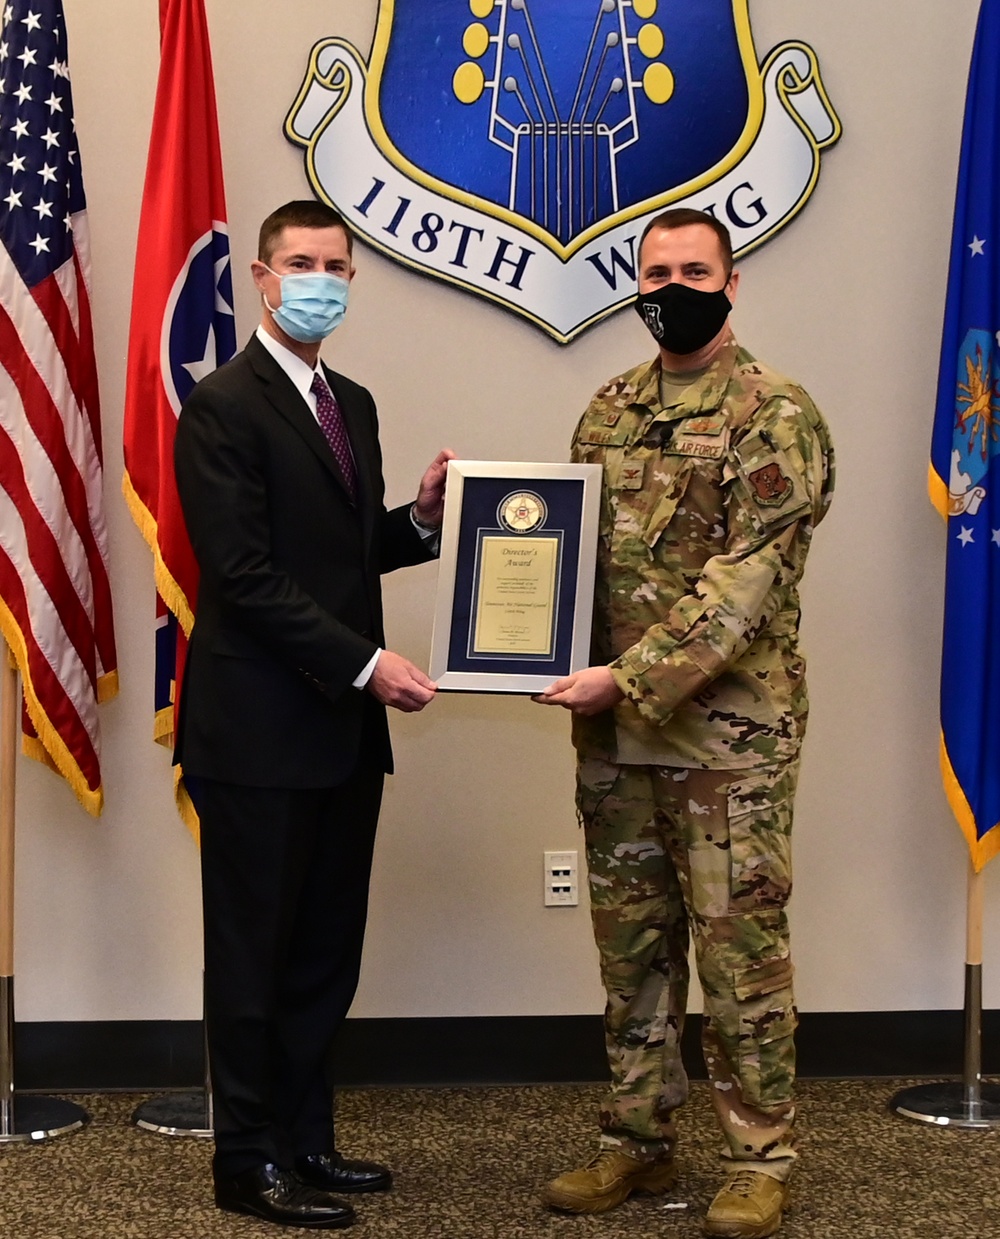 118th Wing receives Secret Service Director's award